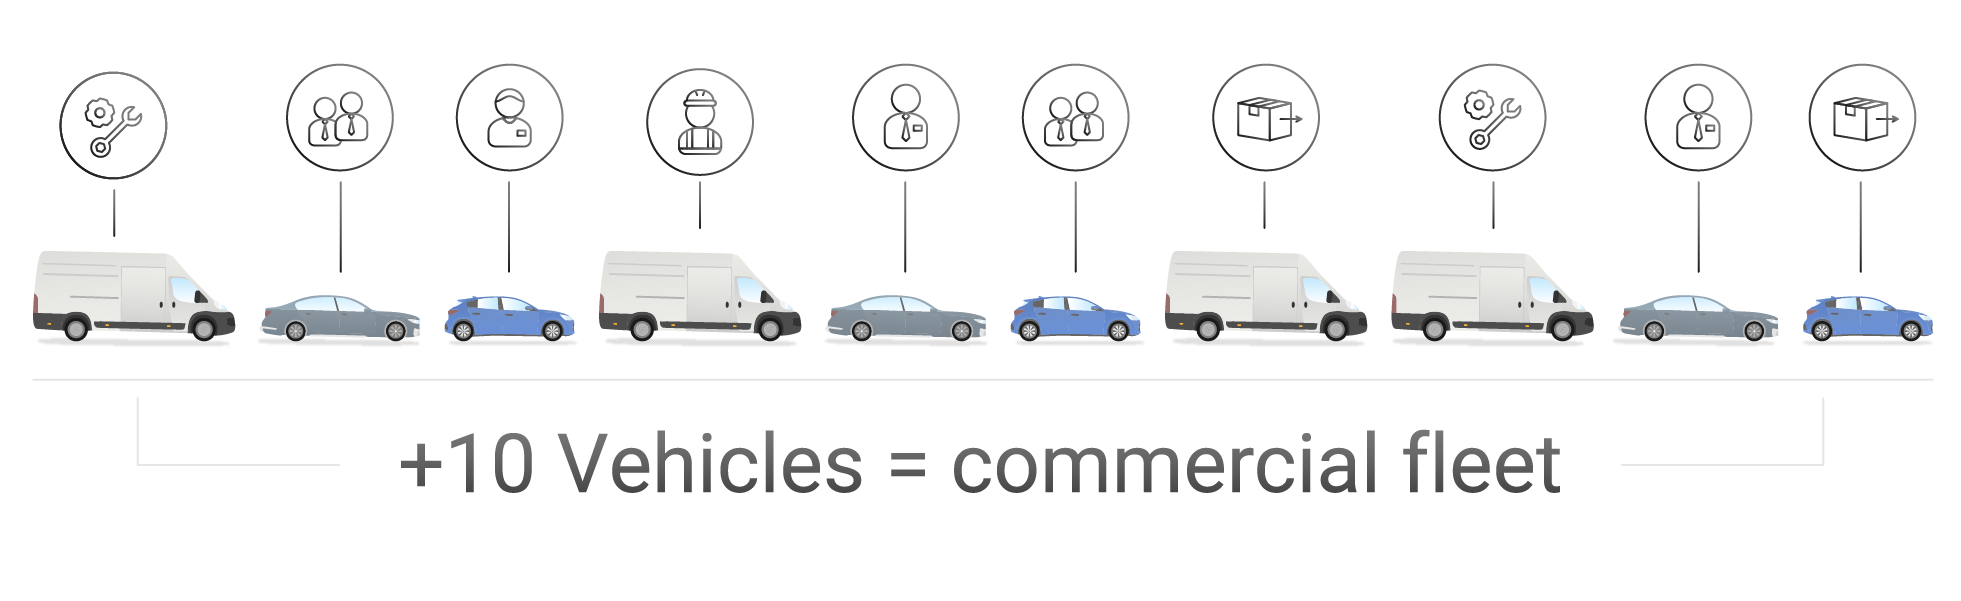 10 vehicles of cars and vans becomes a commercial fleet